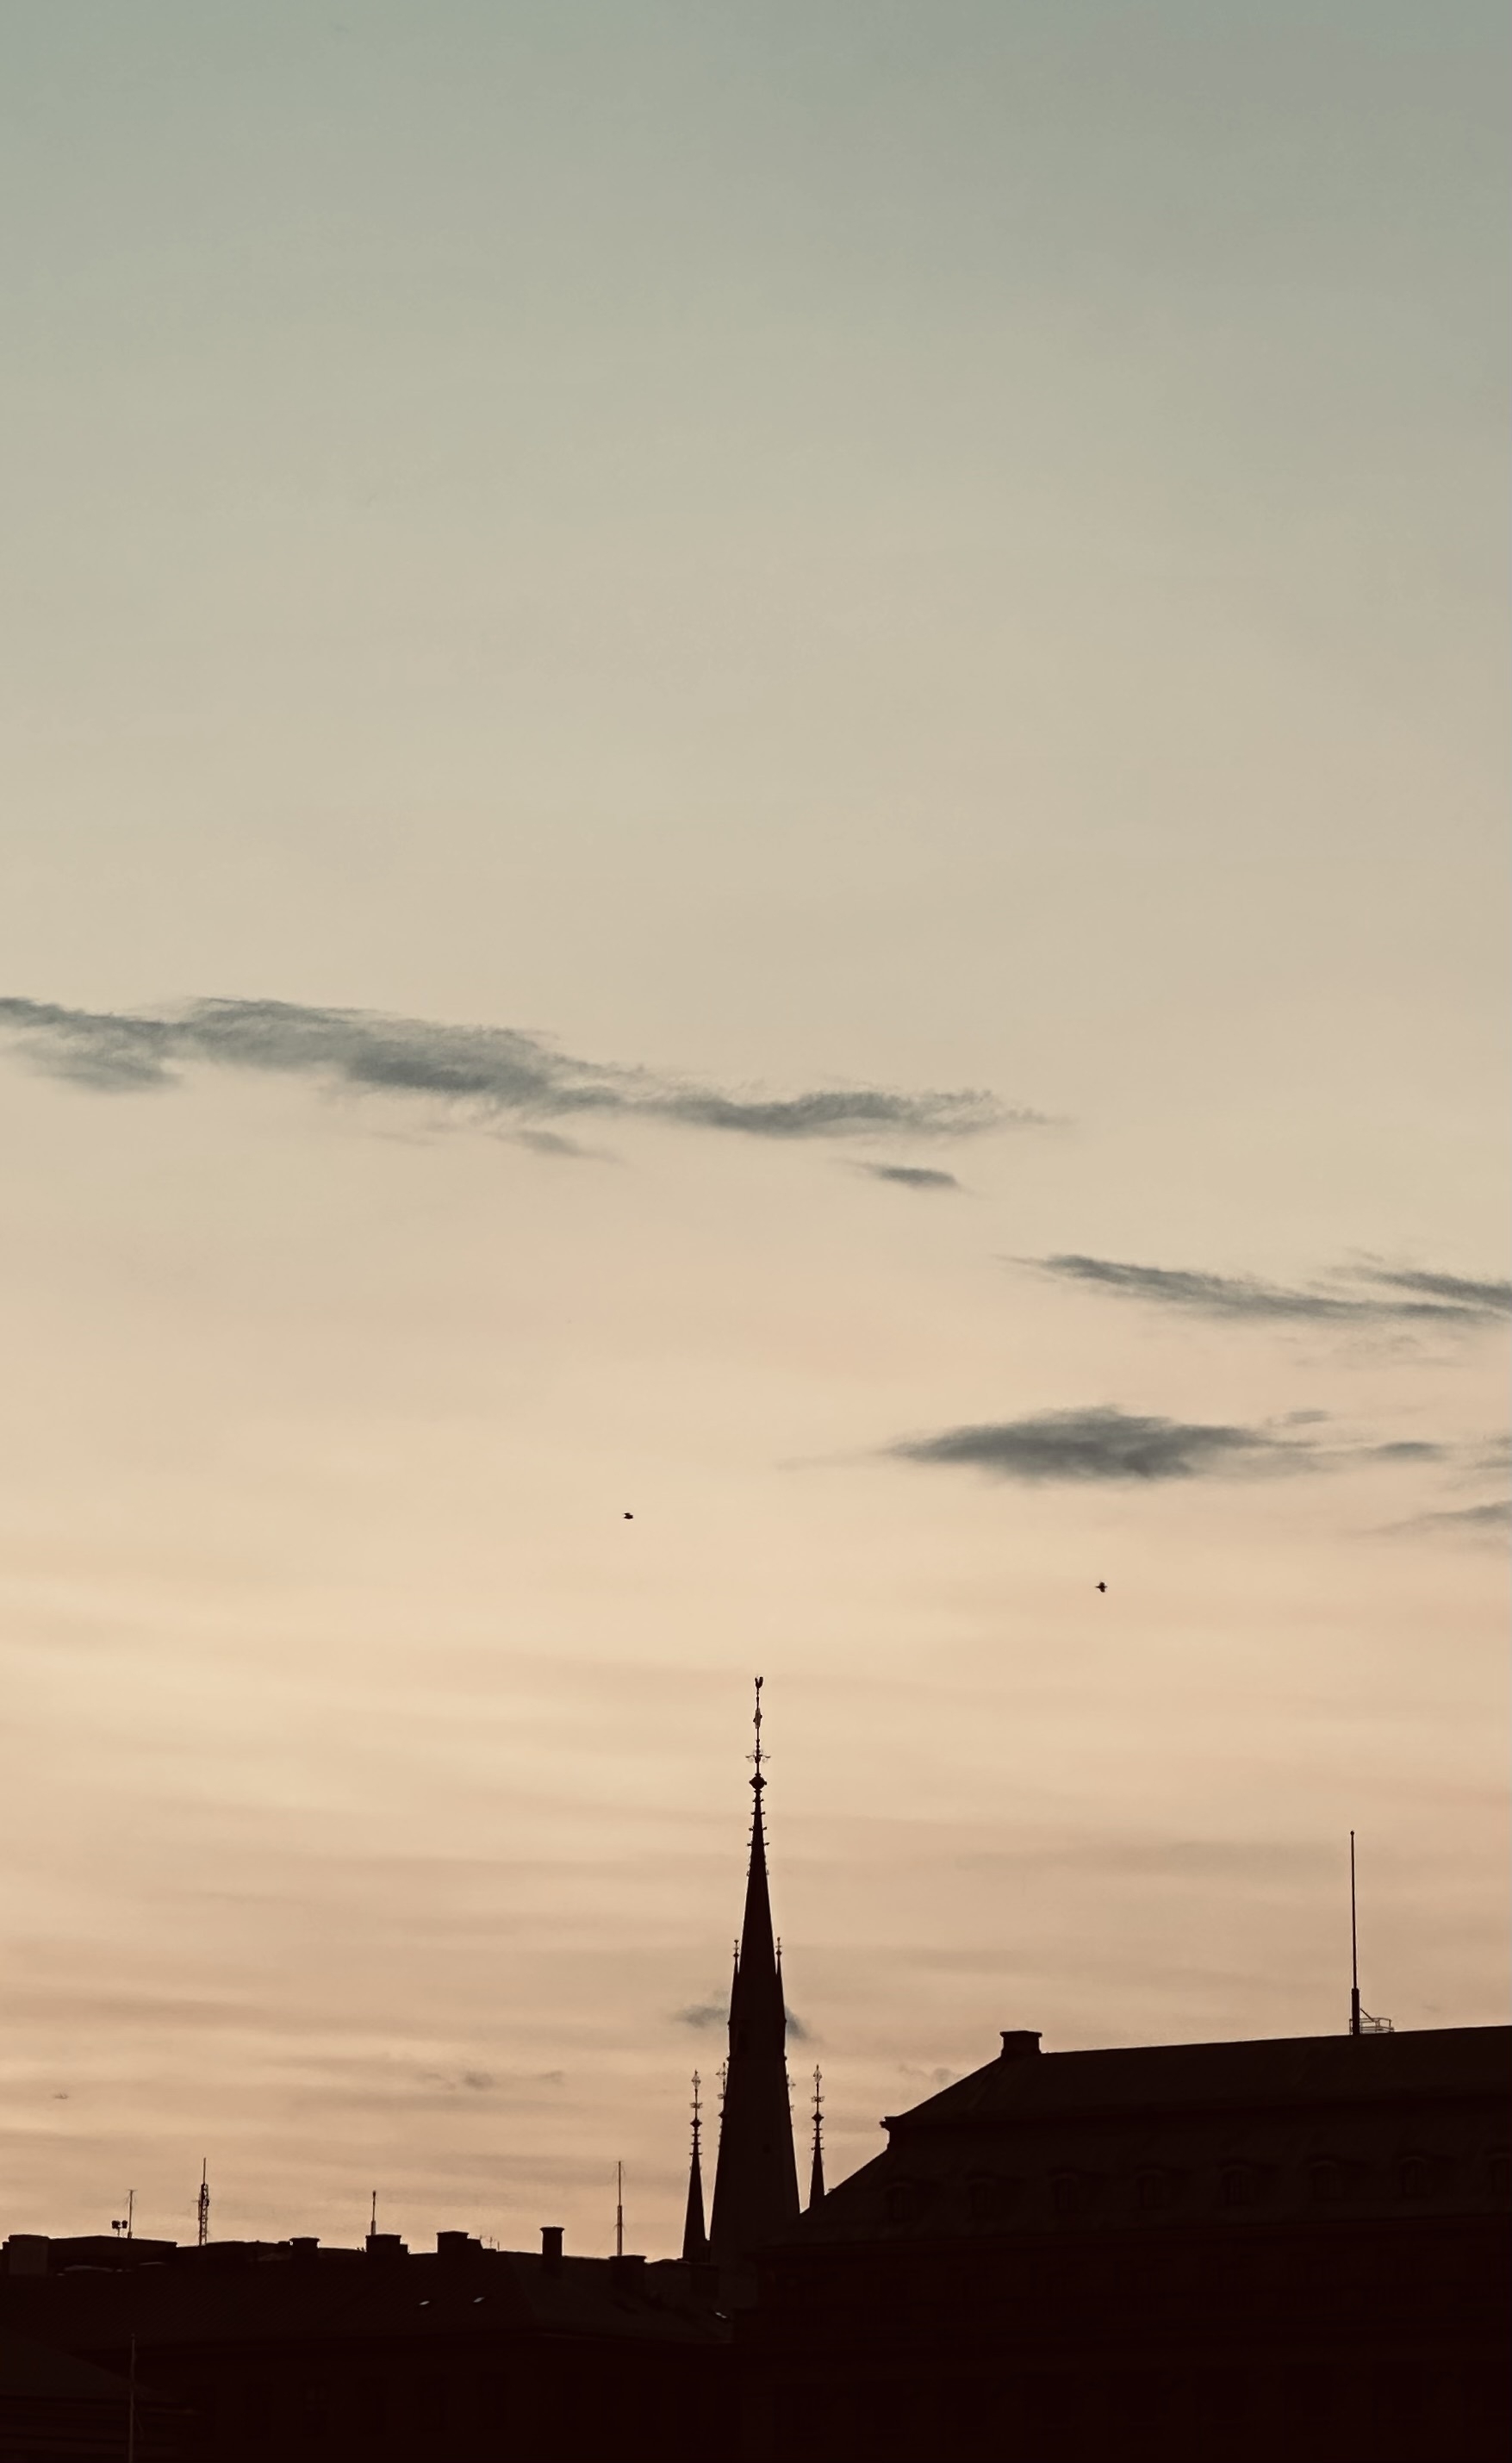 A spire in silhouette against a pale sky.